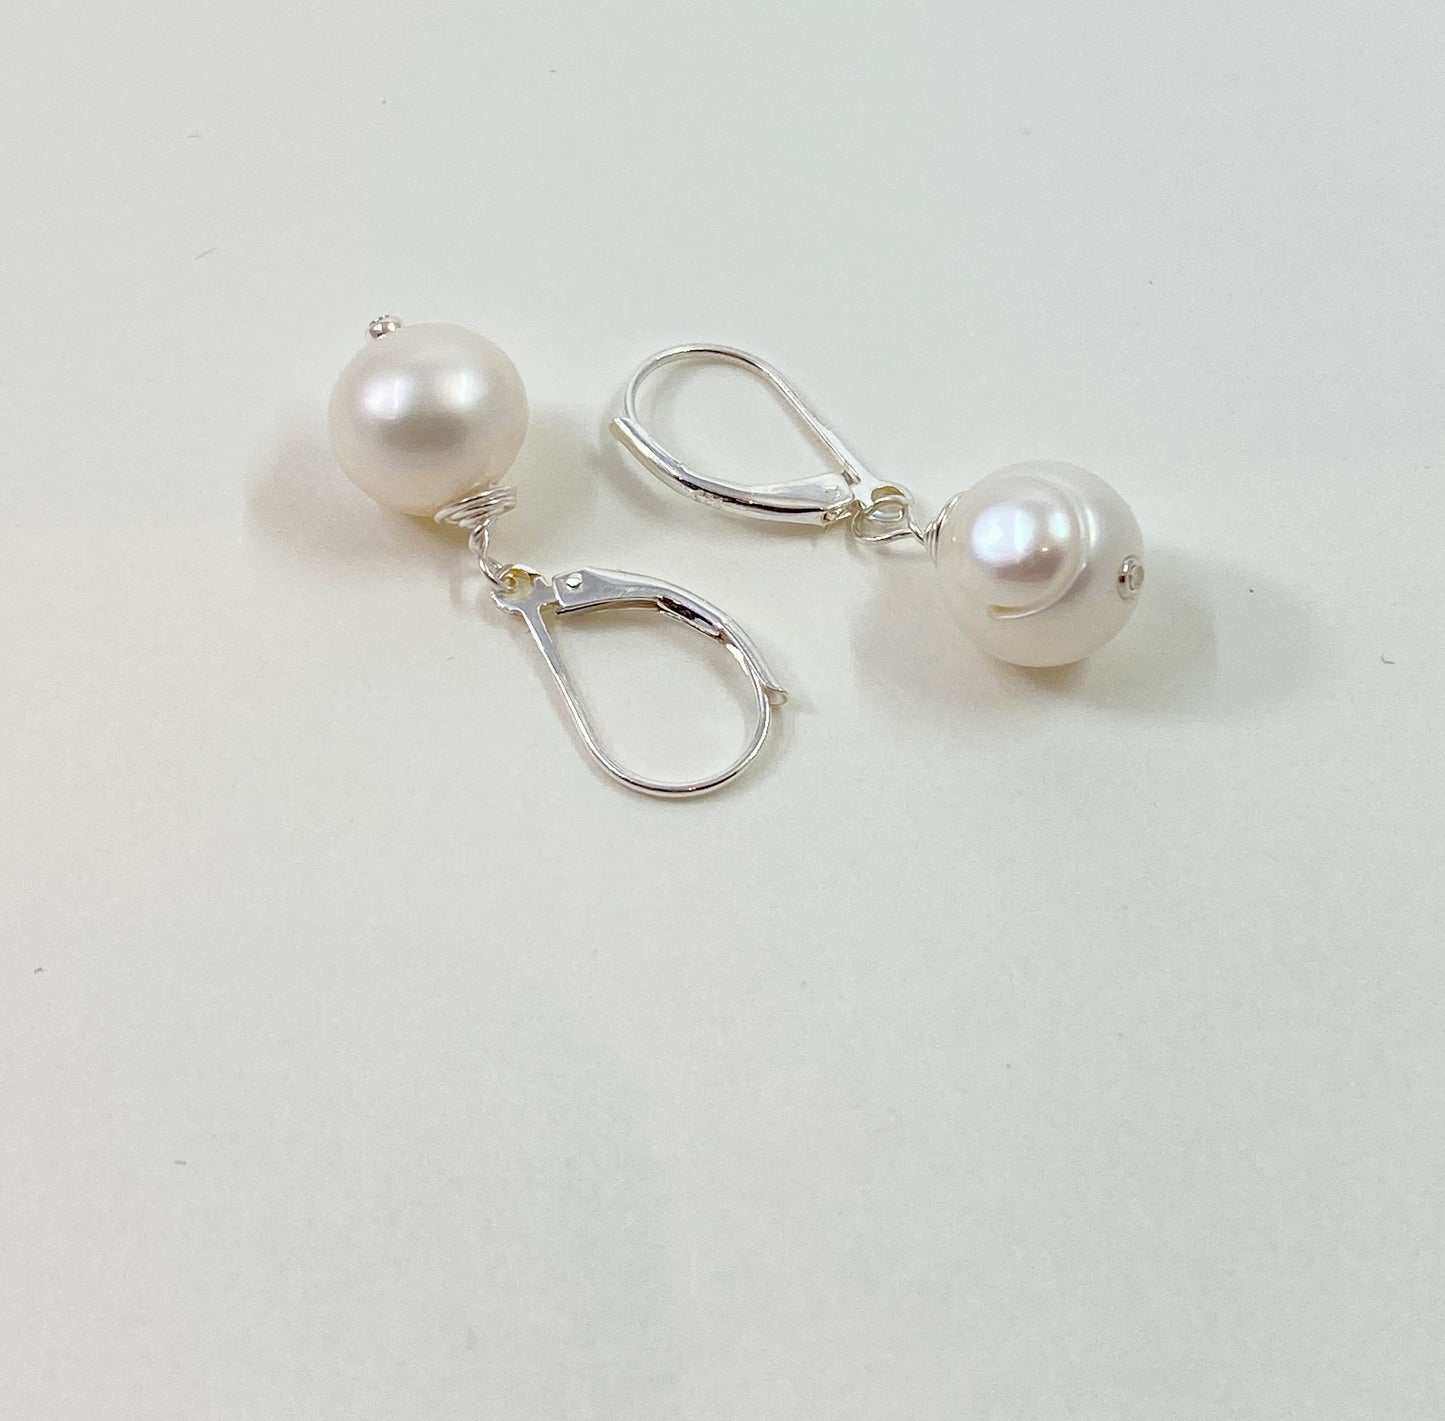 Gorgeous large round fresh water pearl earrings on sterling silver lever back ear wires